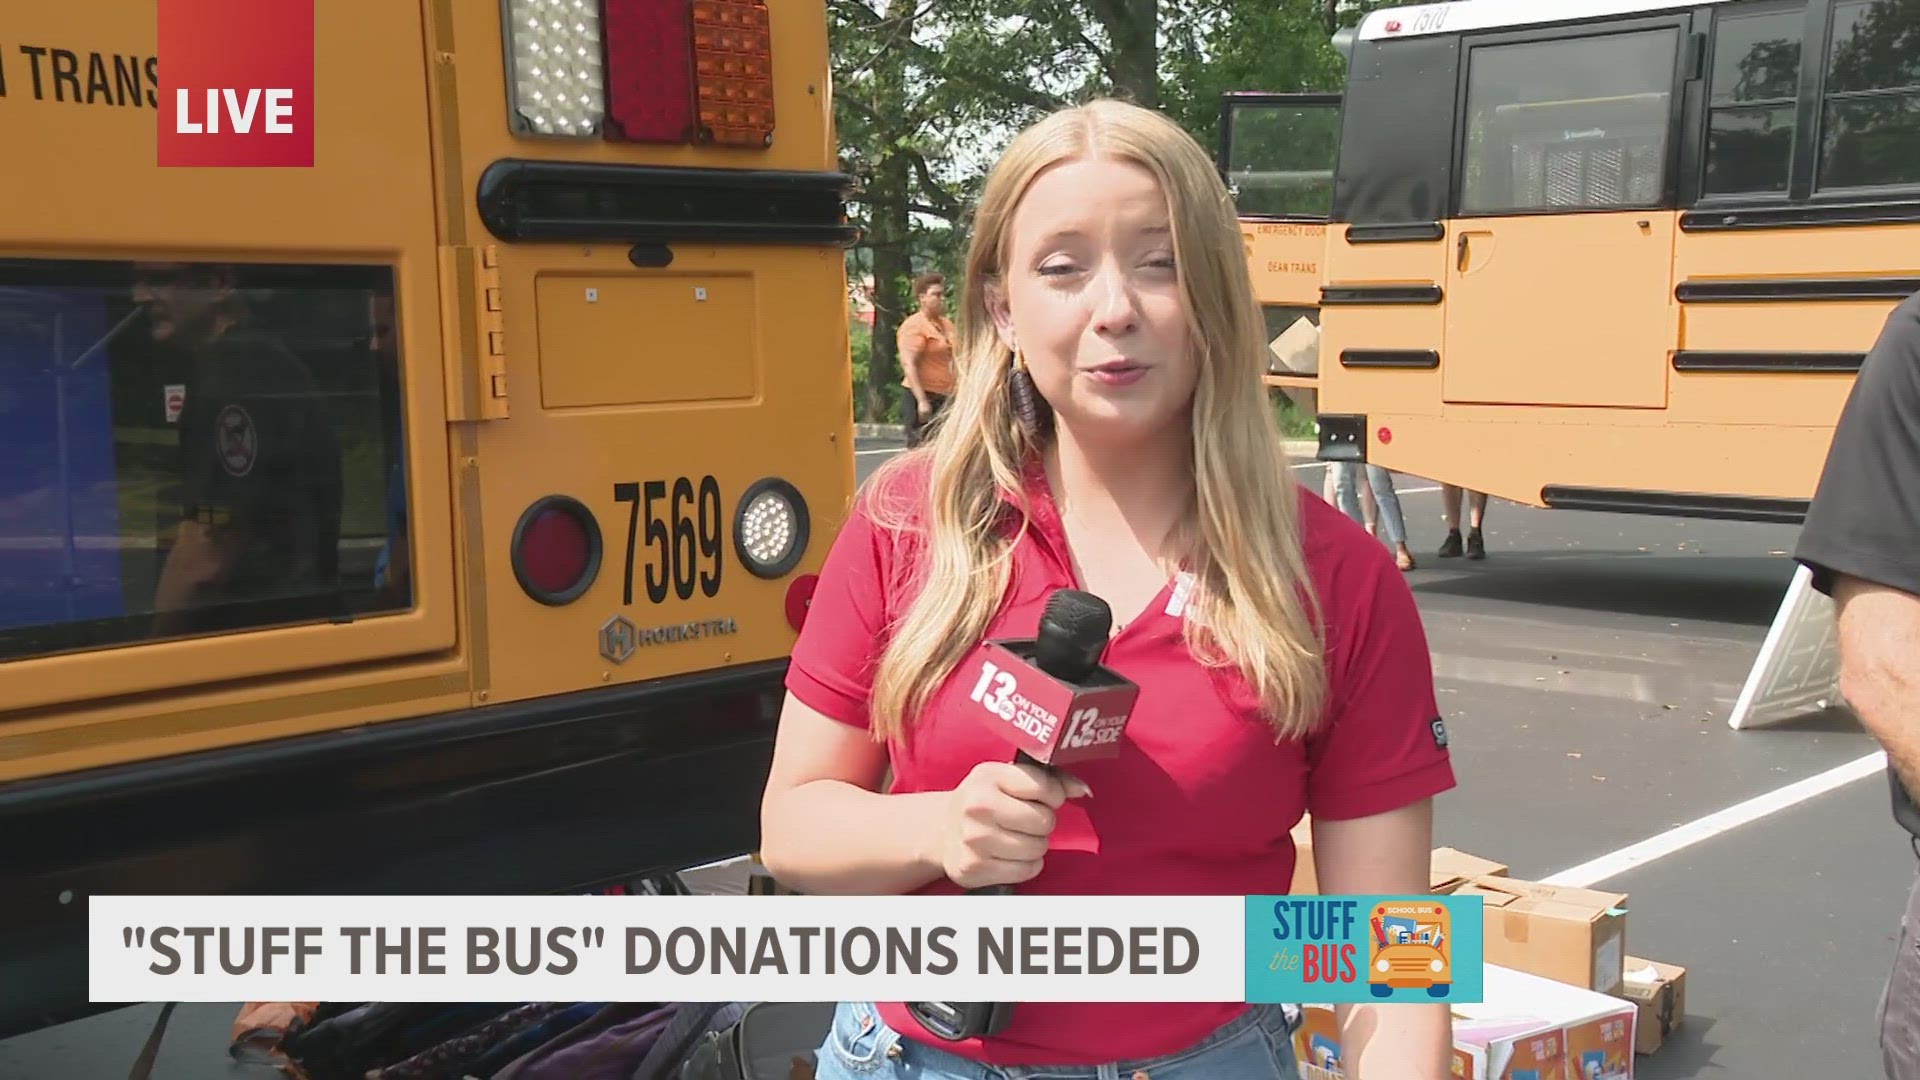 Penguins, United Way 'Stuff the Bus' to help kids